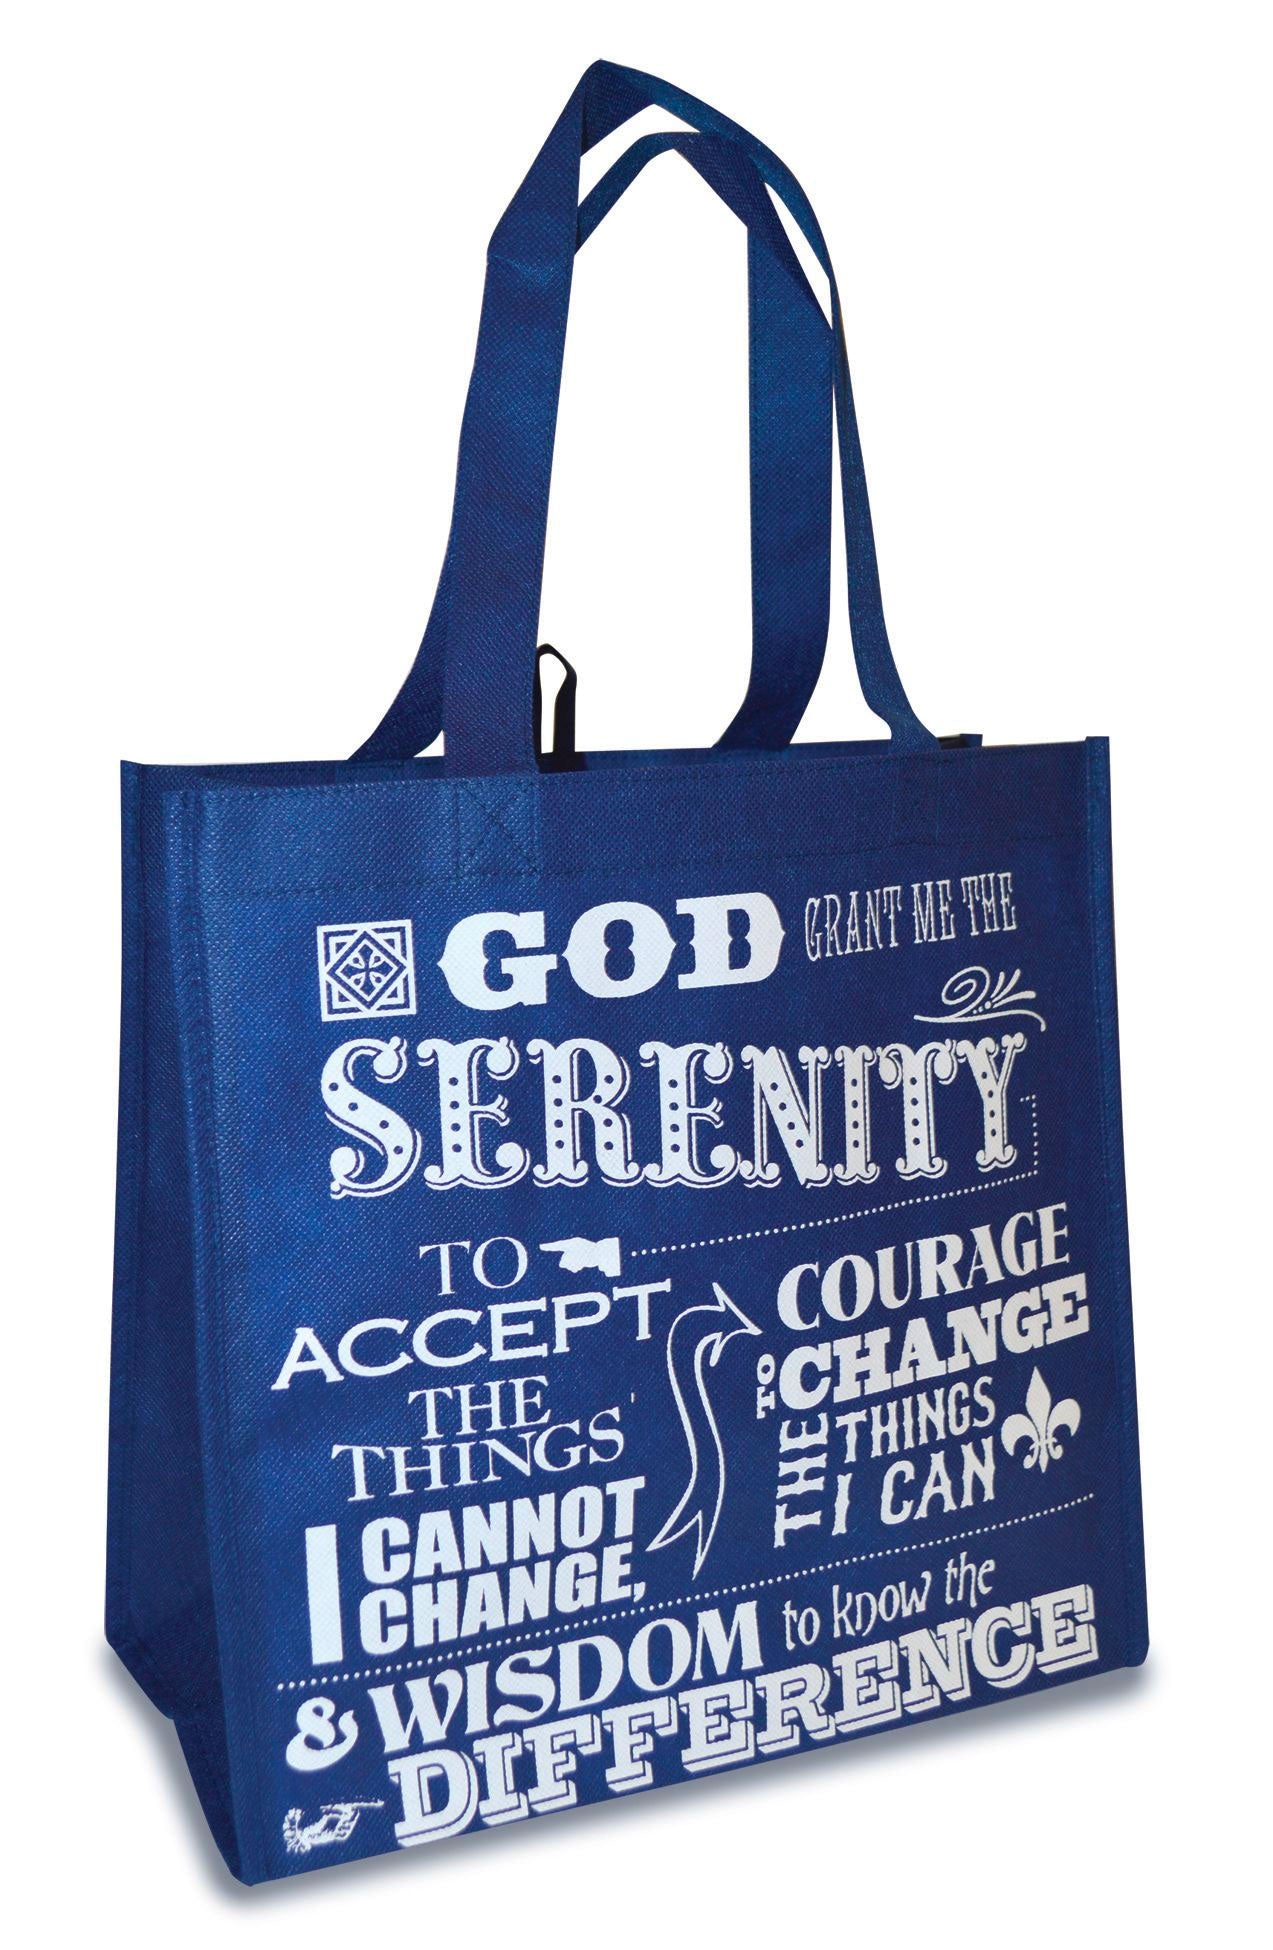 Our Eco Tote reusable shopping bags measure 12.5" x 6" x 12" and feature an inspirational message. Bags fold flat, can hold up to 20 pounds & have a small loop for hanging. Perfect for groceries, Bible study or as an everyday bag! Reusable shopping bags. Holds up to 20 lbs. Dimensions: 12. 5" x 6" x 12". Small loop for hanging. Features the Serenity Prayer. Material: Non-Woven Fabric.